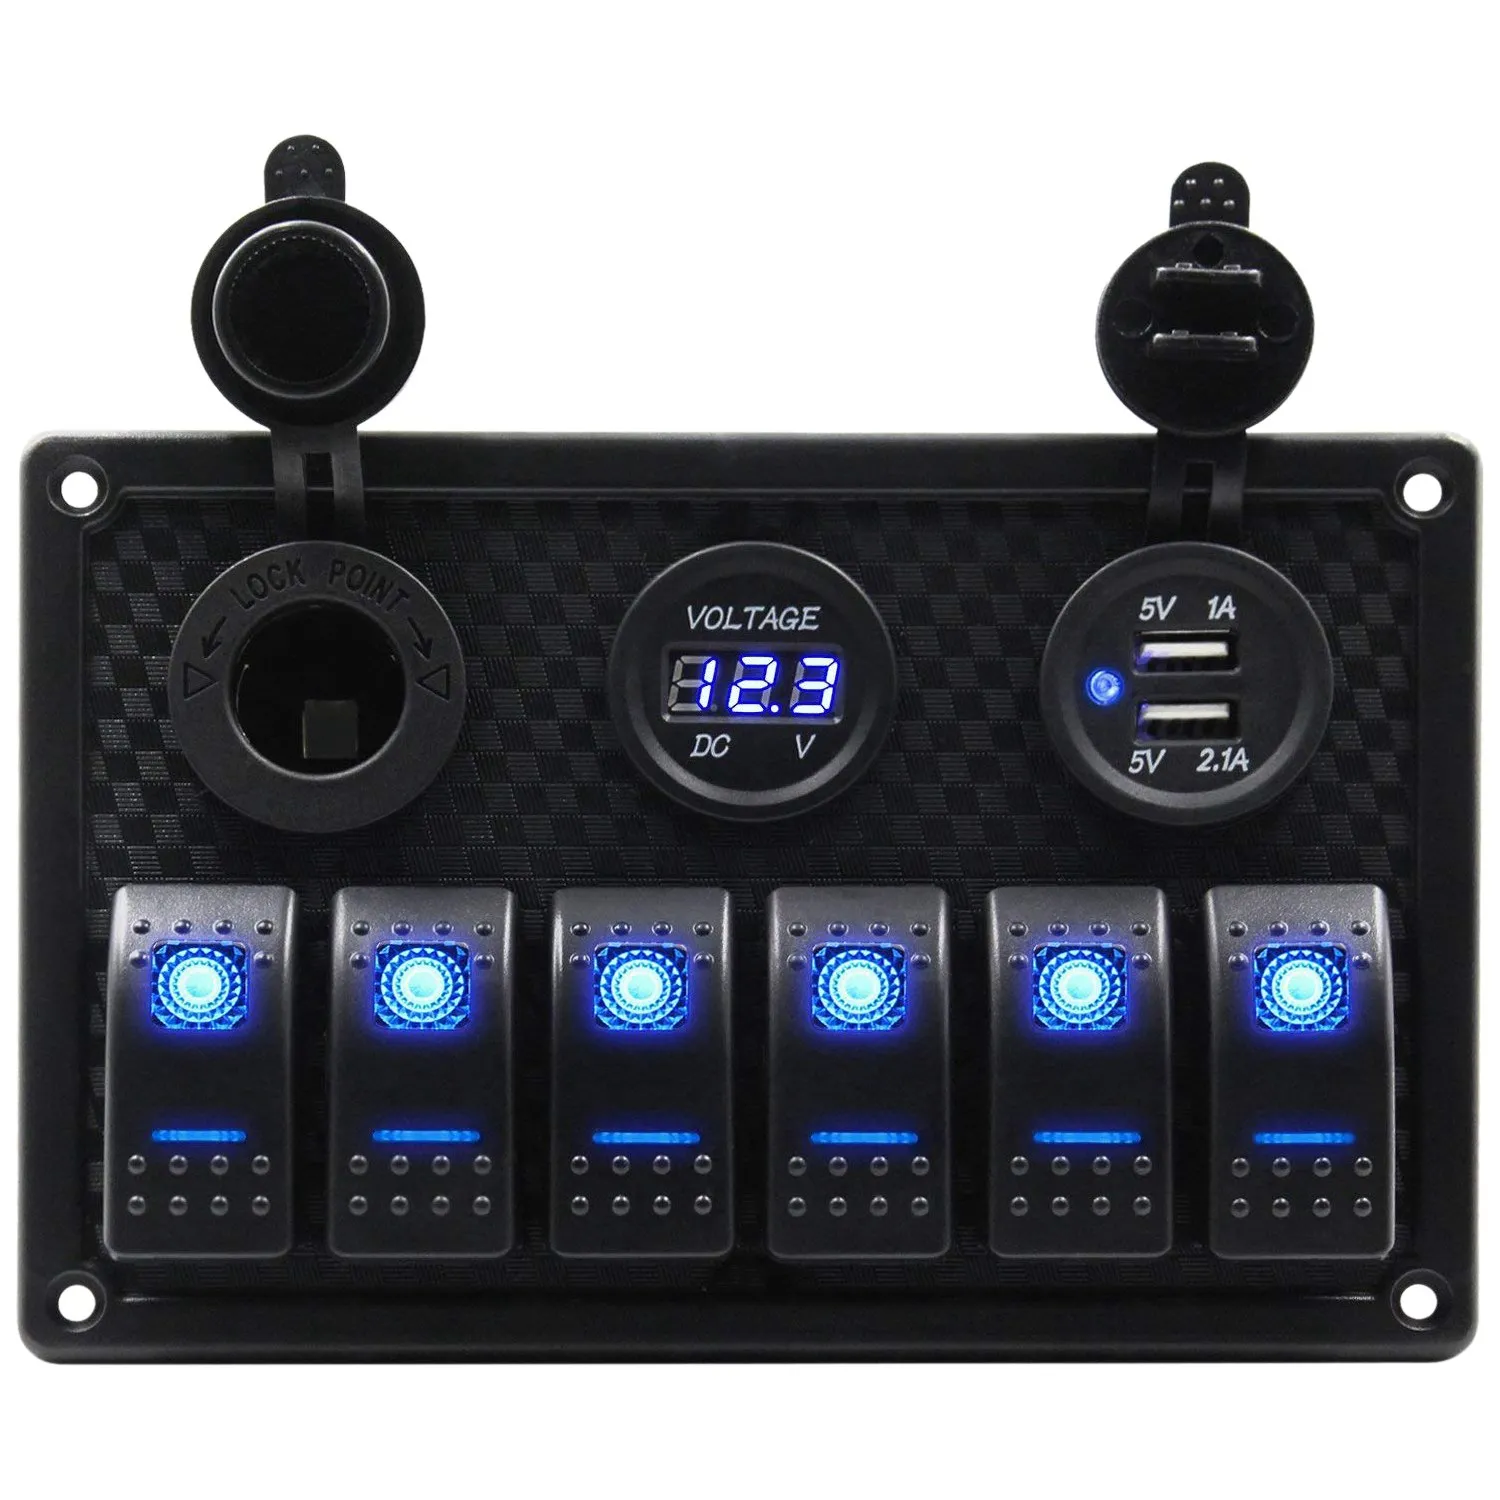 

6 Gang Waterproof Marine Boat Rocker Switch Panel with Blue LED Backlight for Car SUV Marine RV Truck Camper Boat